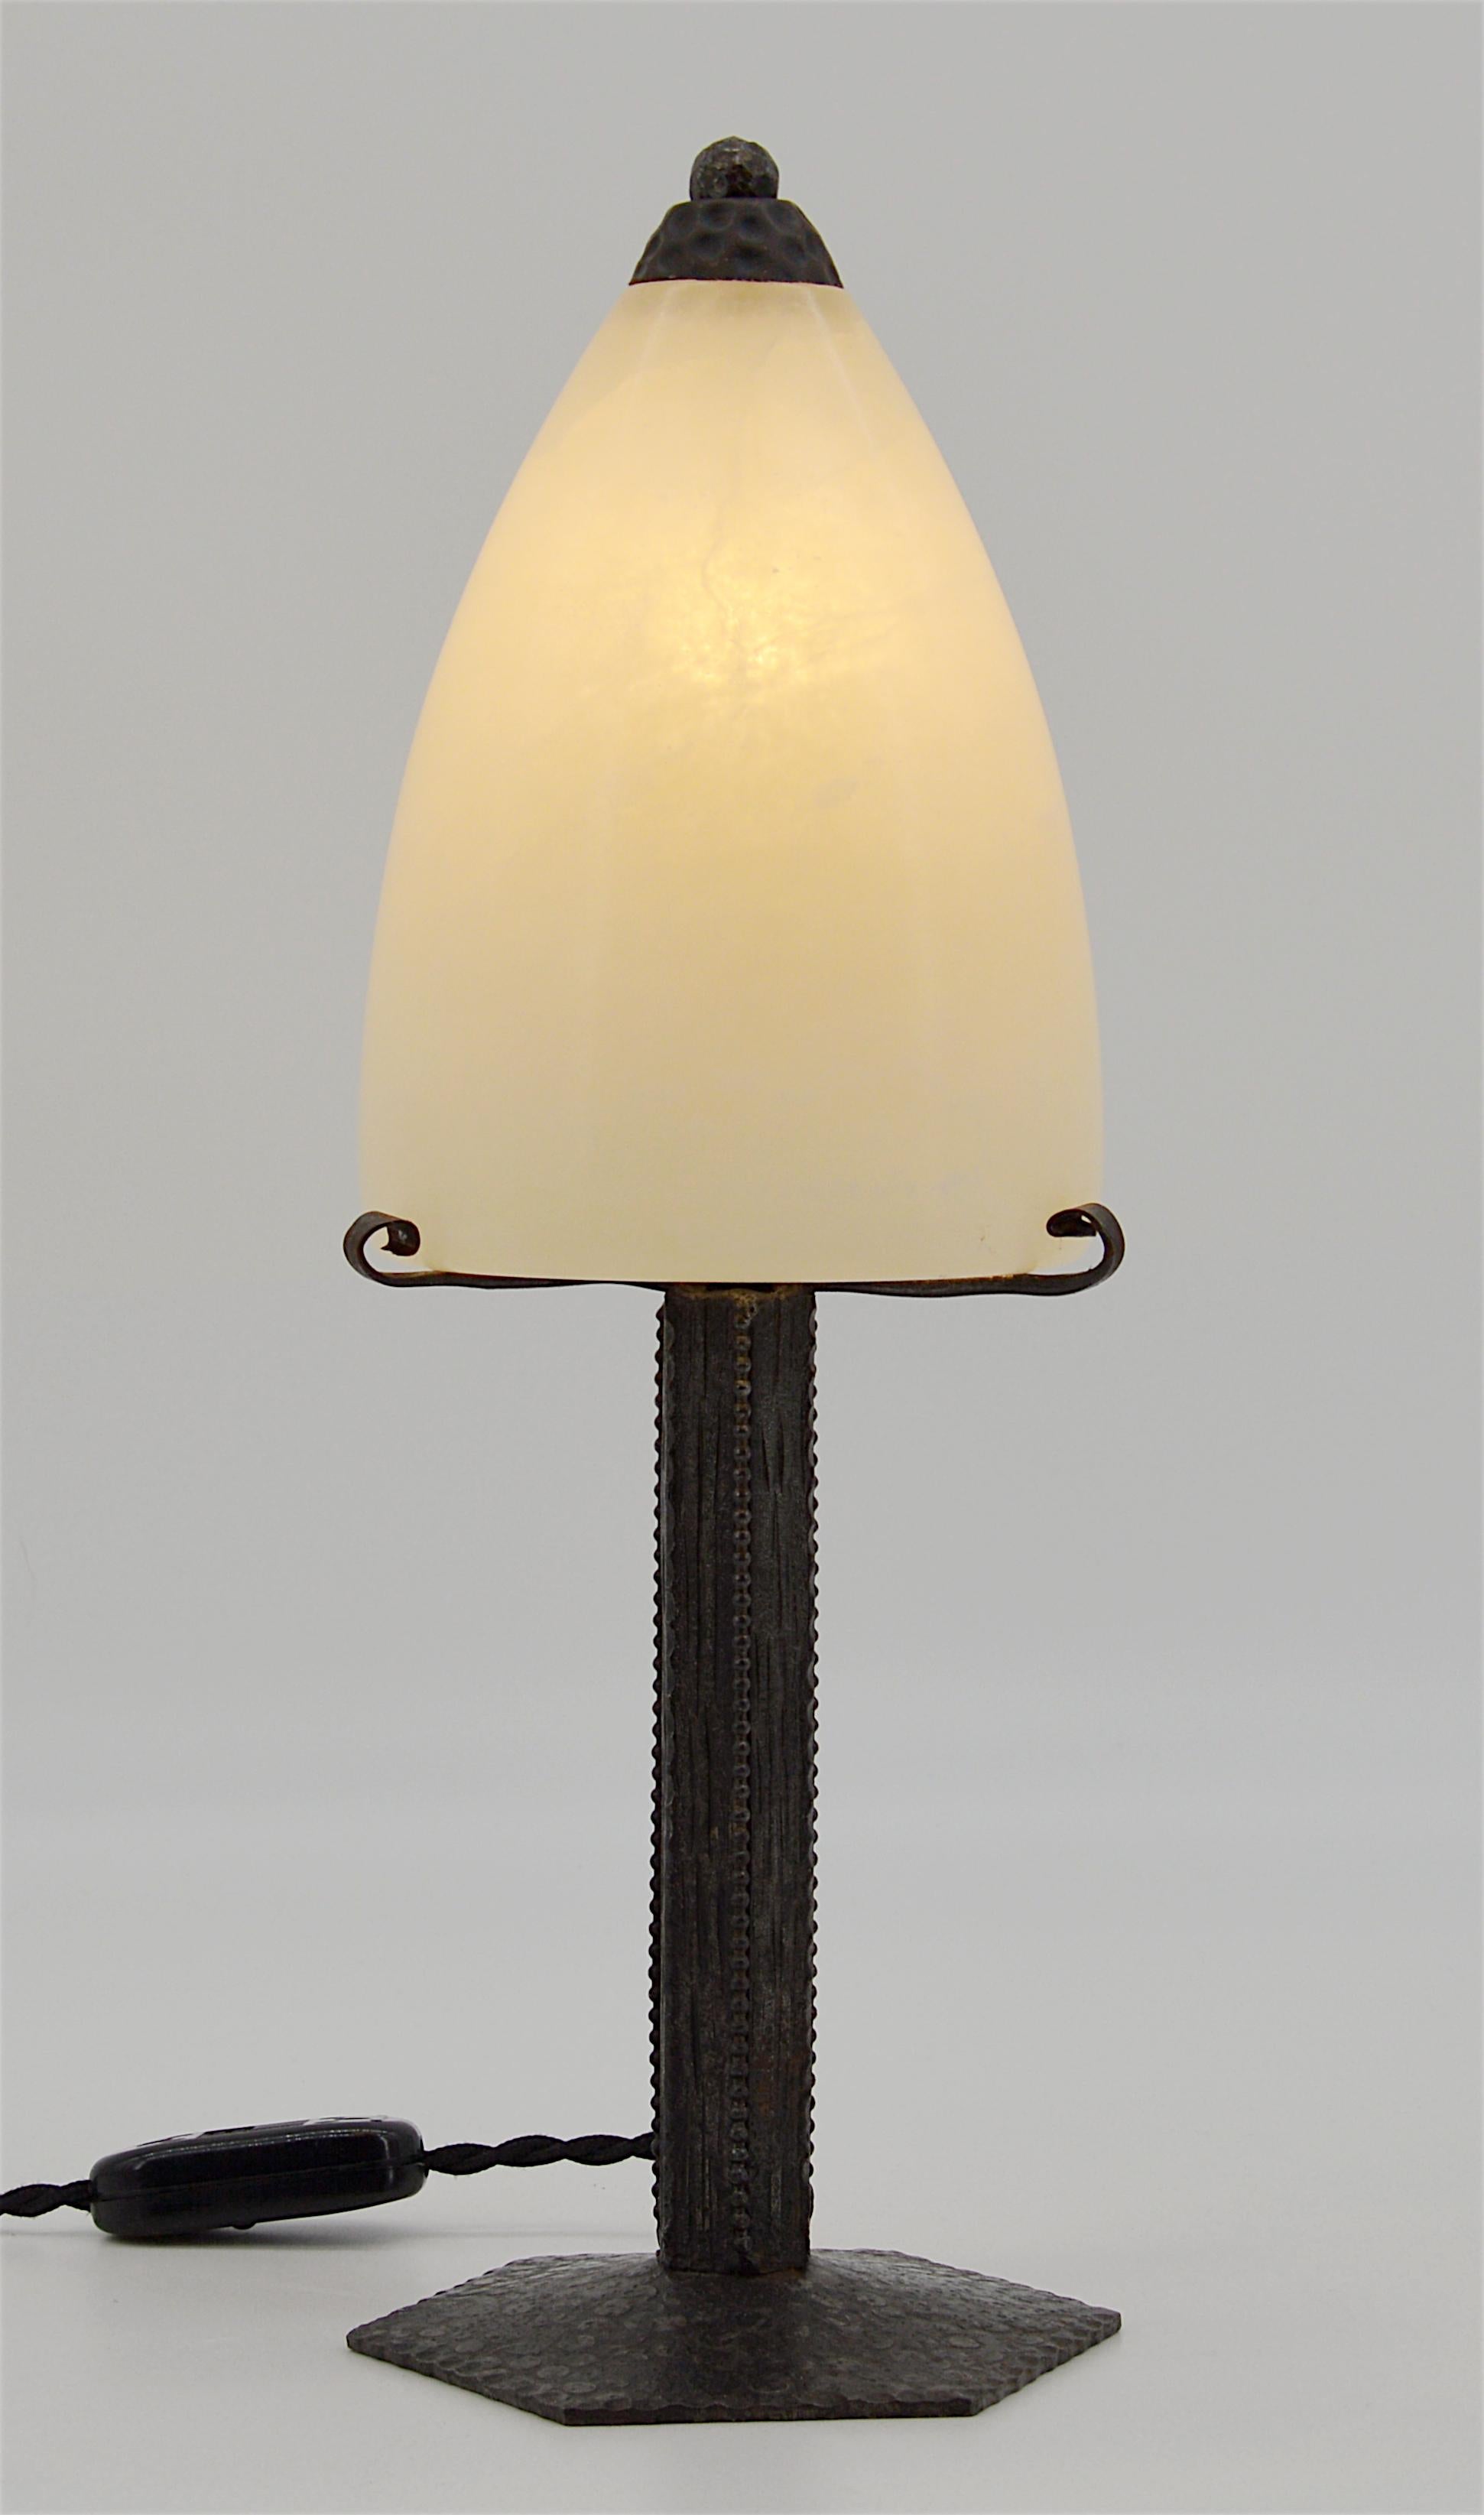 French Art Deco table lamp by the iron worker Charles Piguet, Lyon, France, early 1920s. The precious base comes with its alabaster shade. Measures: Height 13.4